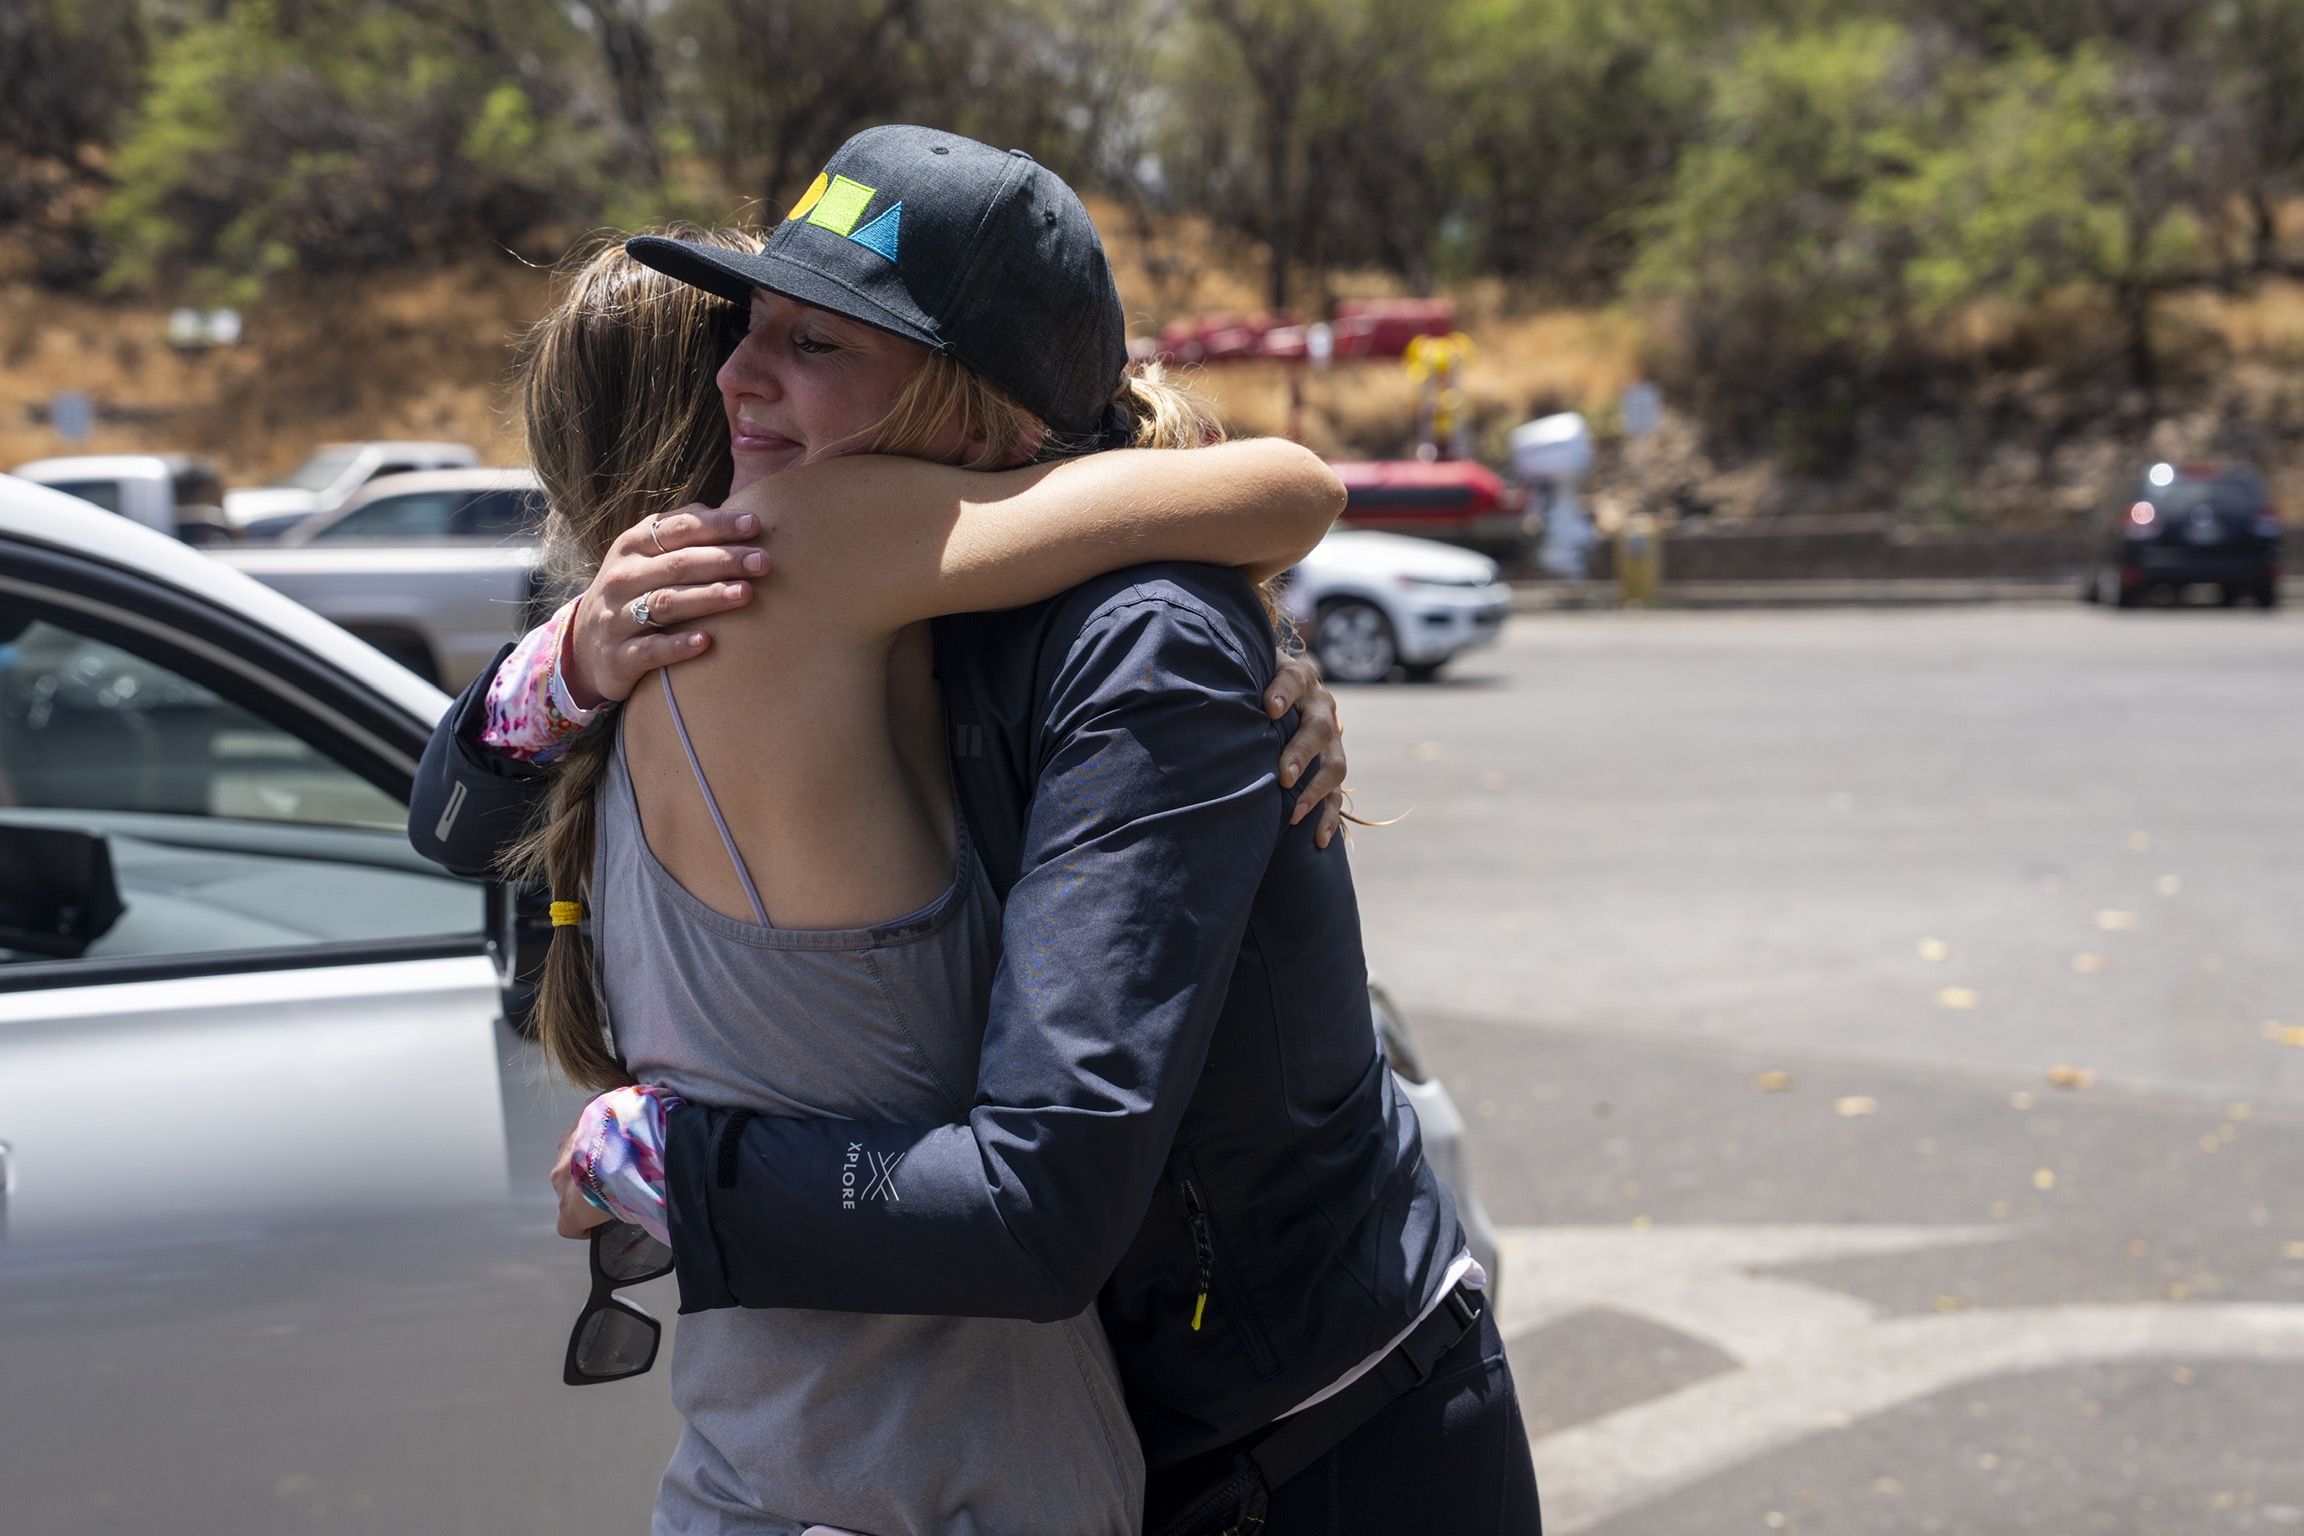 Grace Hurt, right, embraces someone while loading supplies for those in need Saturday at Kihei Ramp on Maui. "The reason why we are out here today is because we have ohana on the west side, boots on the ground that have no roof over their heads," Hurt said. "We are in an effort with the entire community here, we are trying to get them supplies directly."